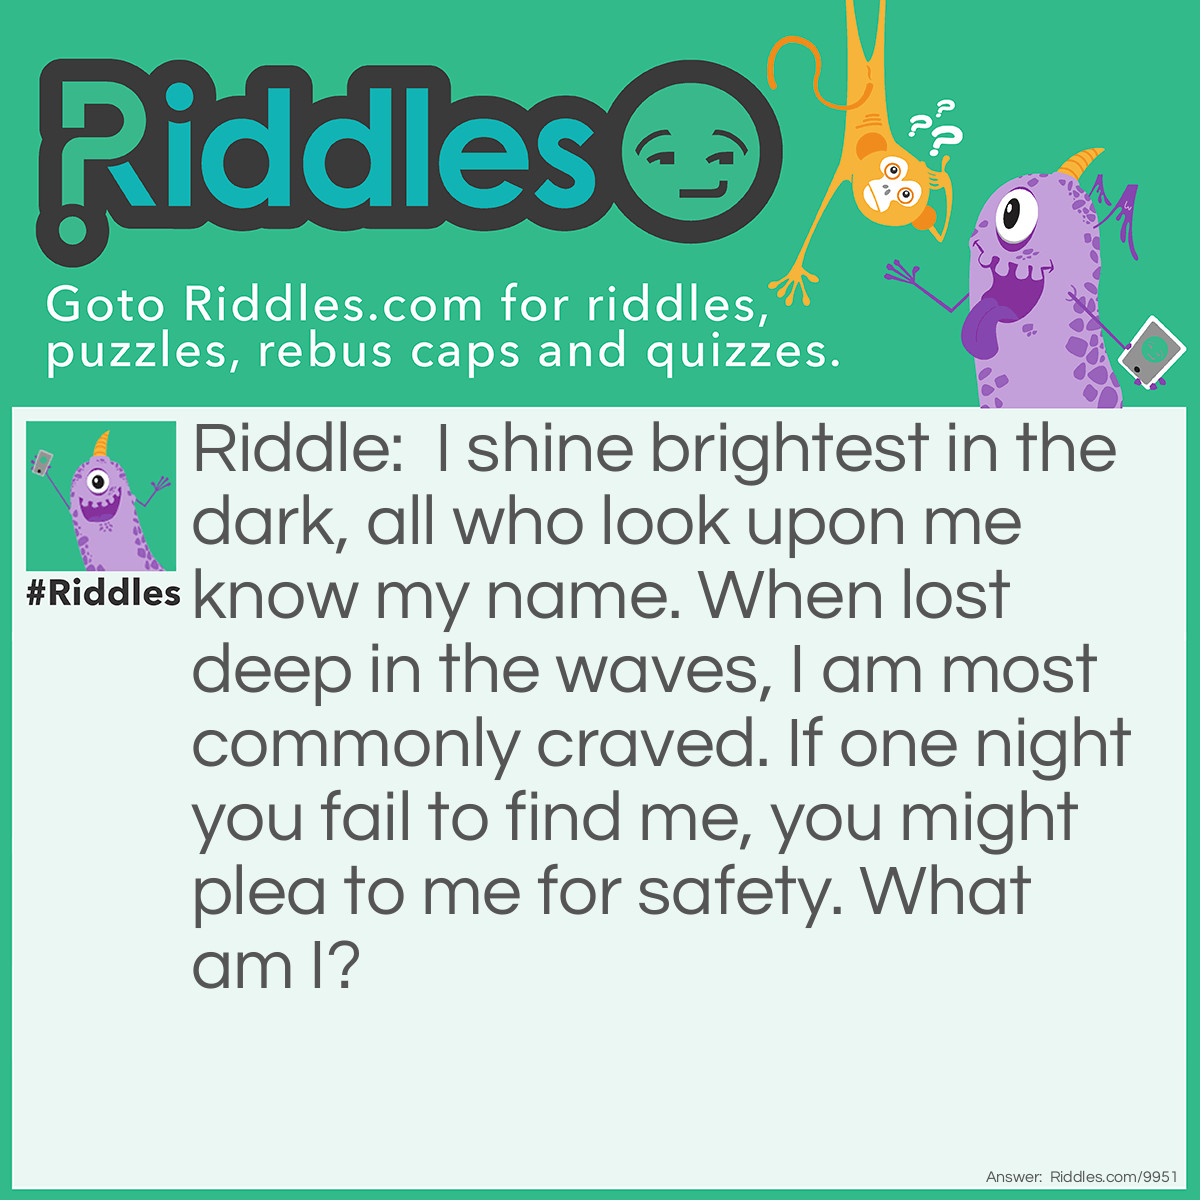 Riddle: I shine brightest in the dark, all who look upon me know my name. When lost deep in the waves, I am most commonly craved. If one night you fail to find me, you might plea to me for safety. What am I? Answer: I'm a lighthouse.